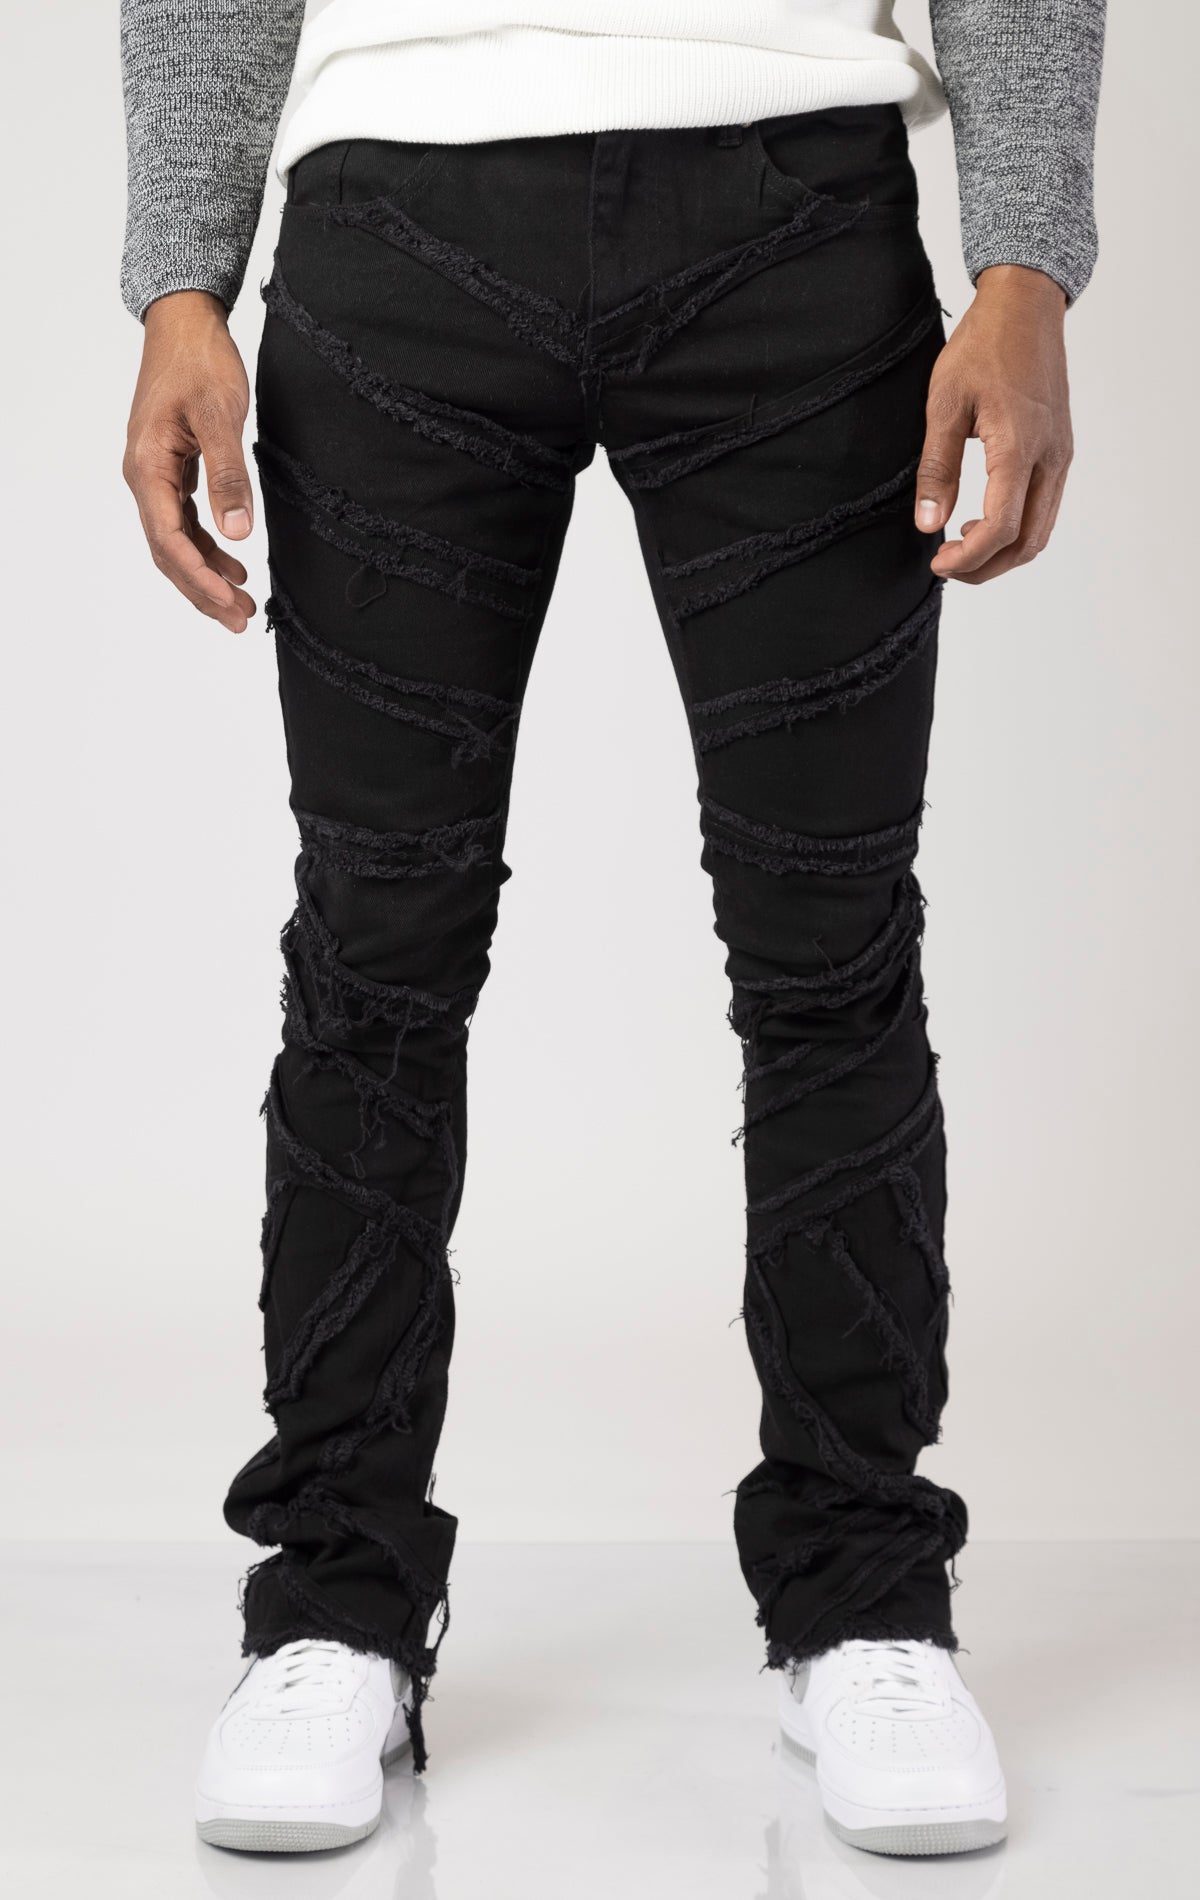 Men's mid-rise, stretchy jeans in a dark wash with a stacked leg design. The jeans feature a purple lace screen print throughout the legs, five pockets, belt loops, and a zipper fly with a top button closure.